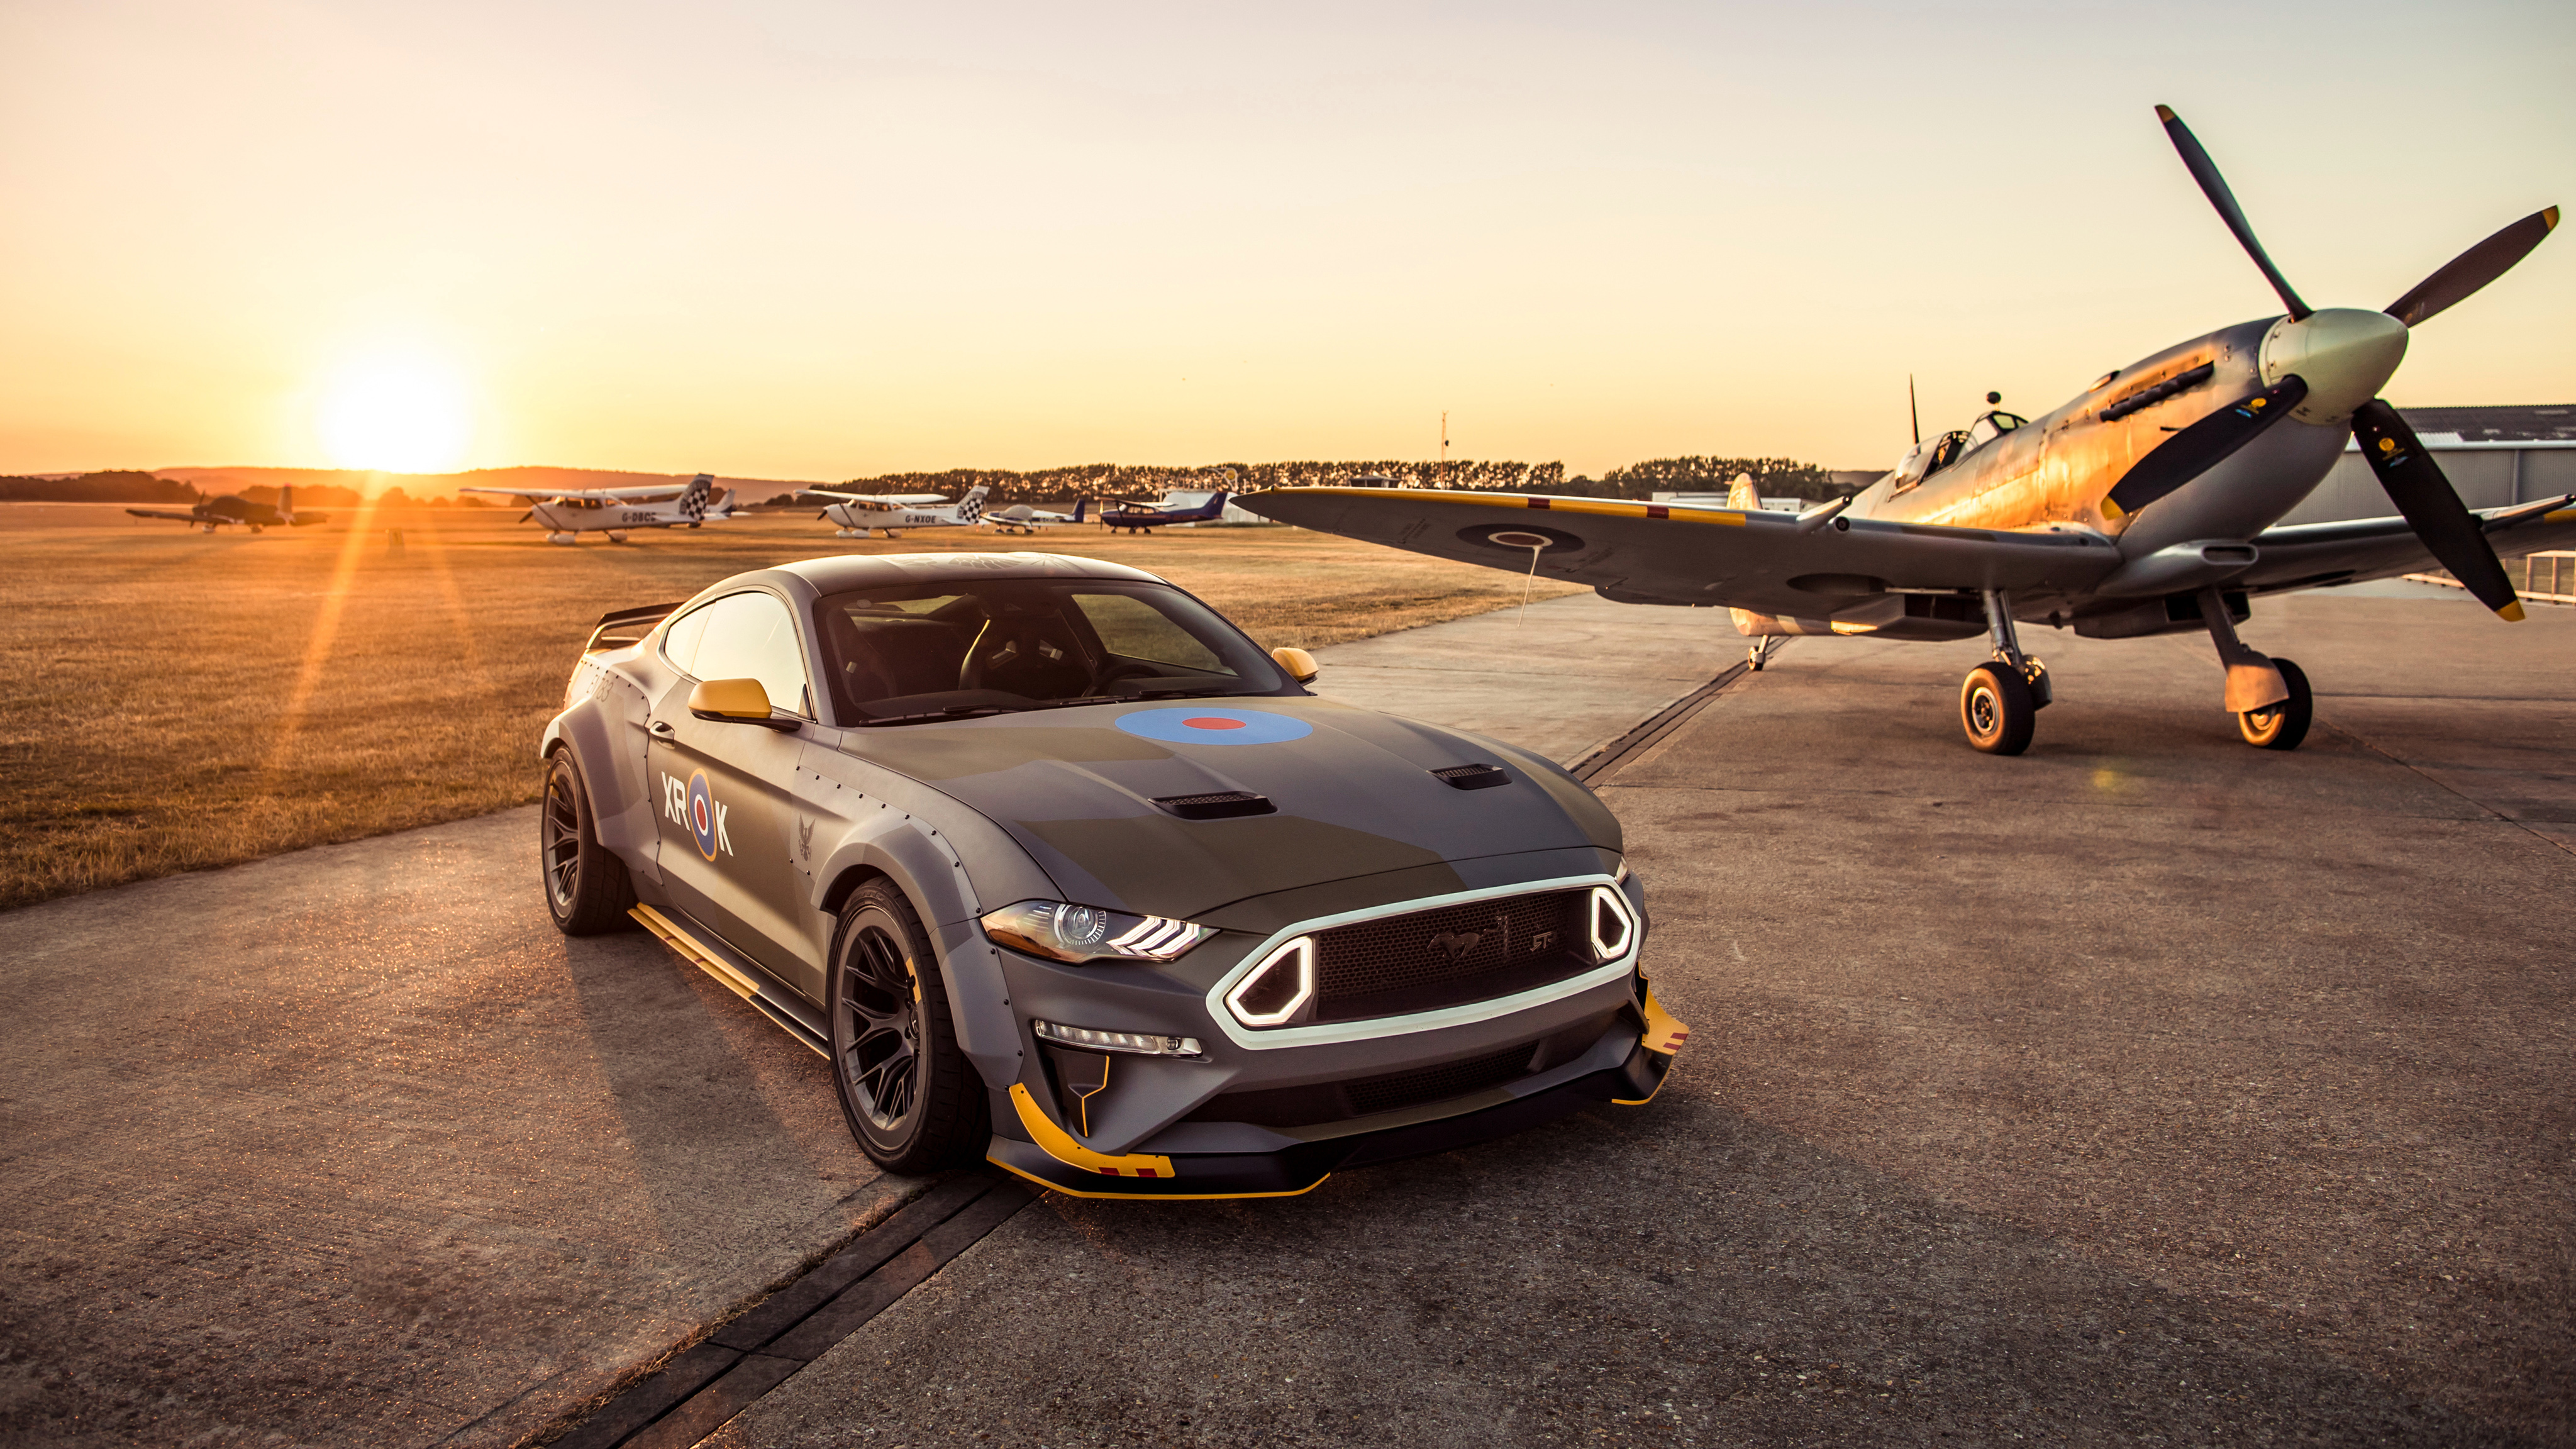 Ford Eagle Squadron Mustang GT 2018 4K